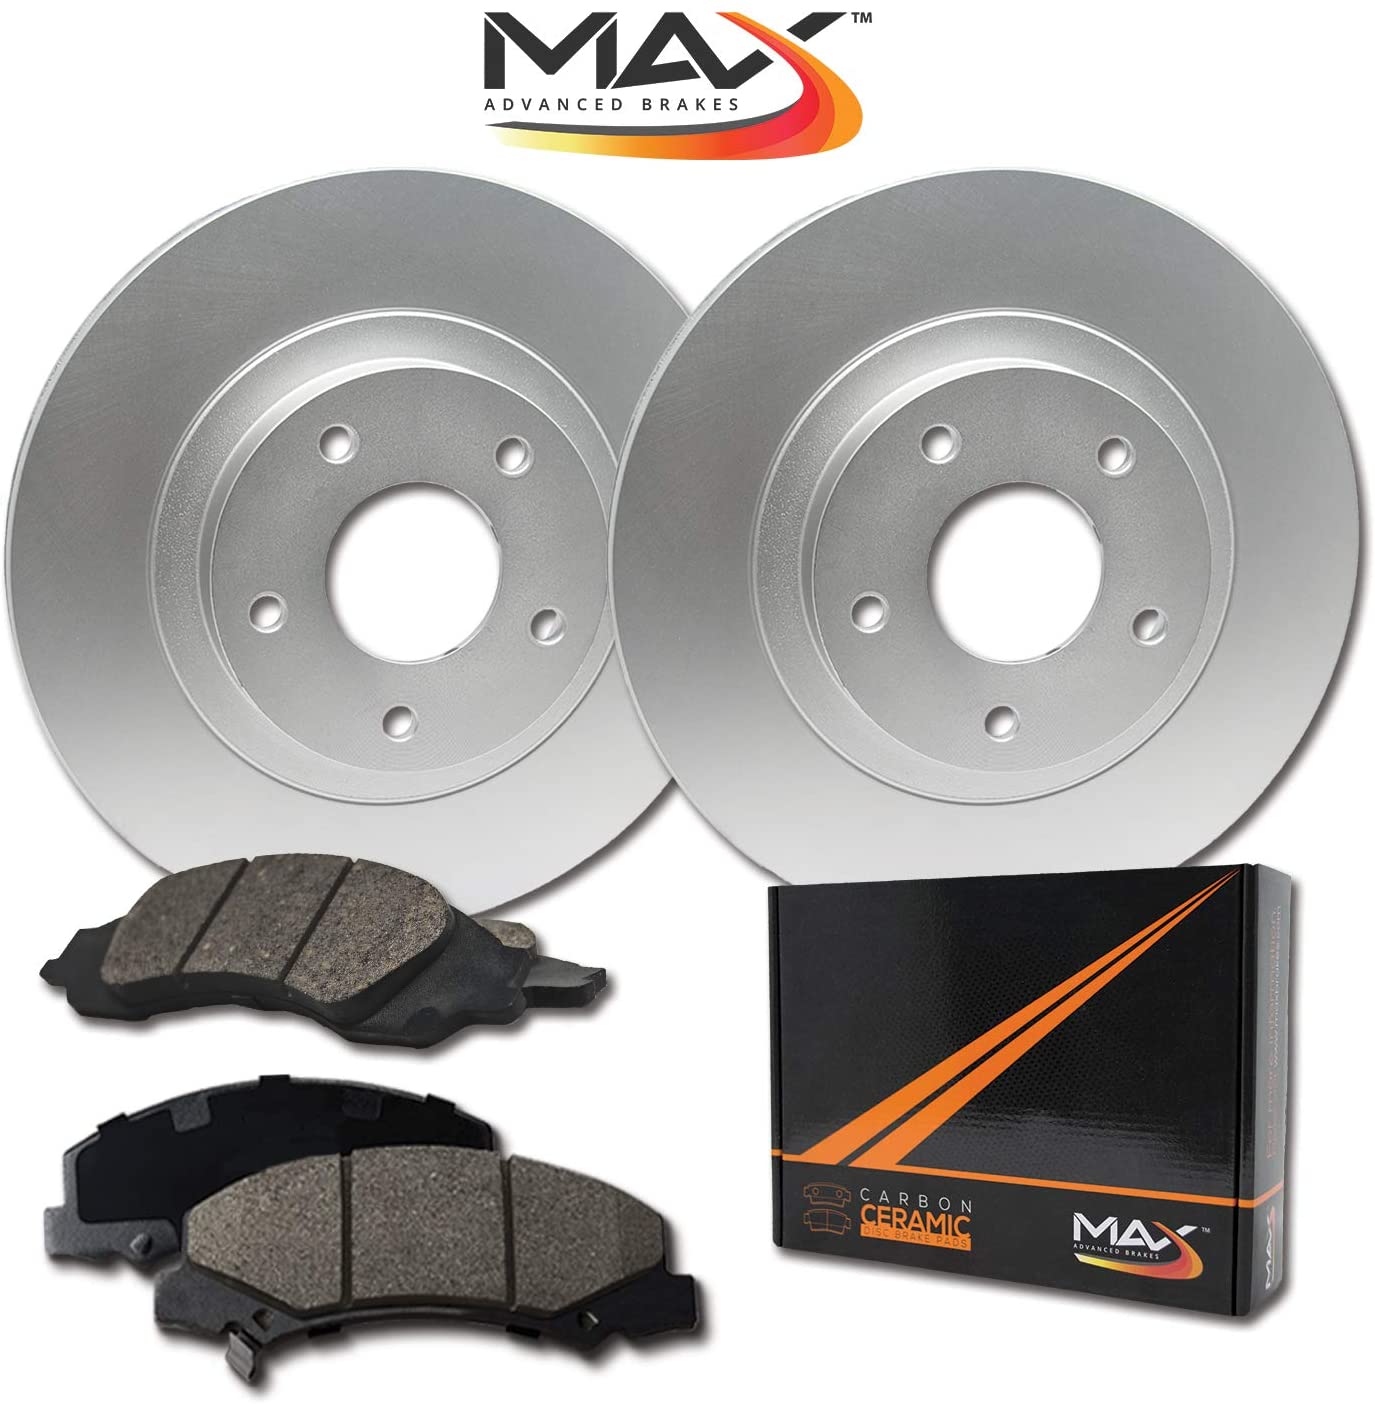 [Rear] Max Brakes Geomet OE Rotors with Carbon Ceramic Pads KT018762